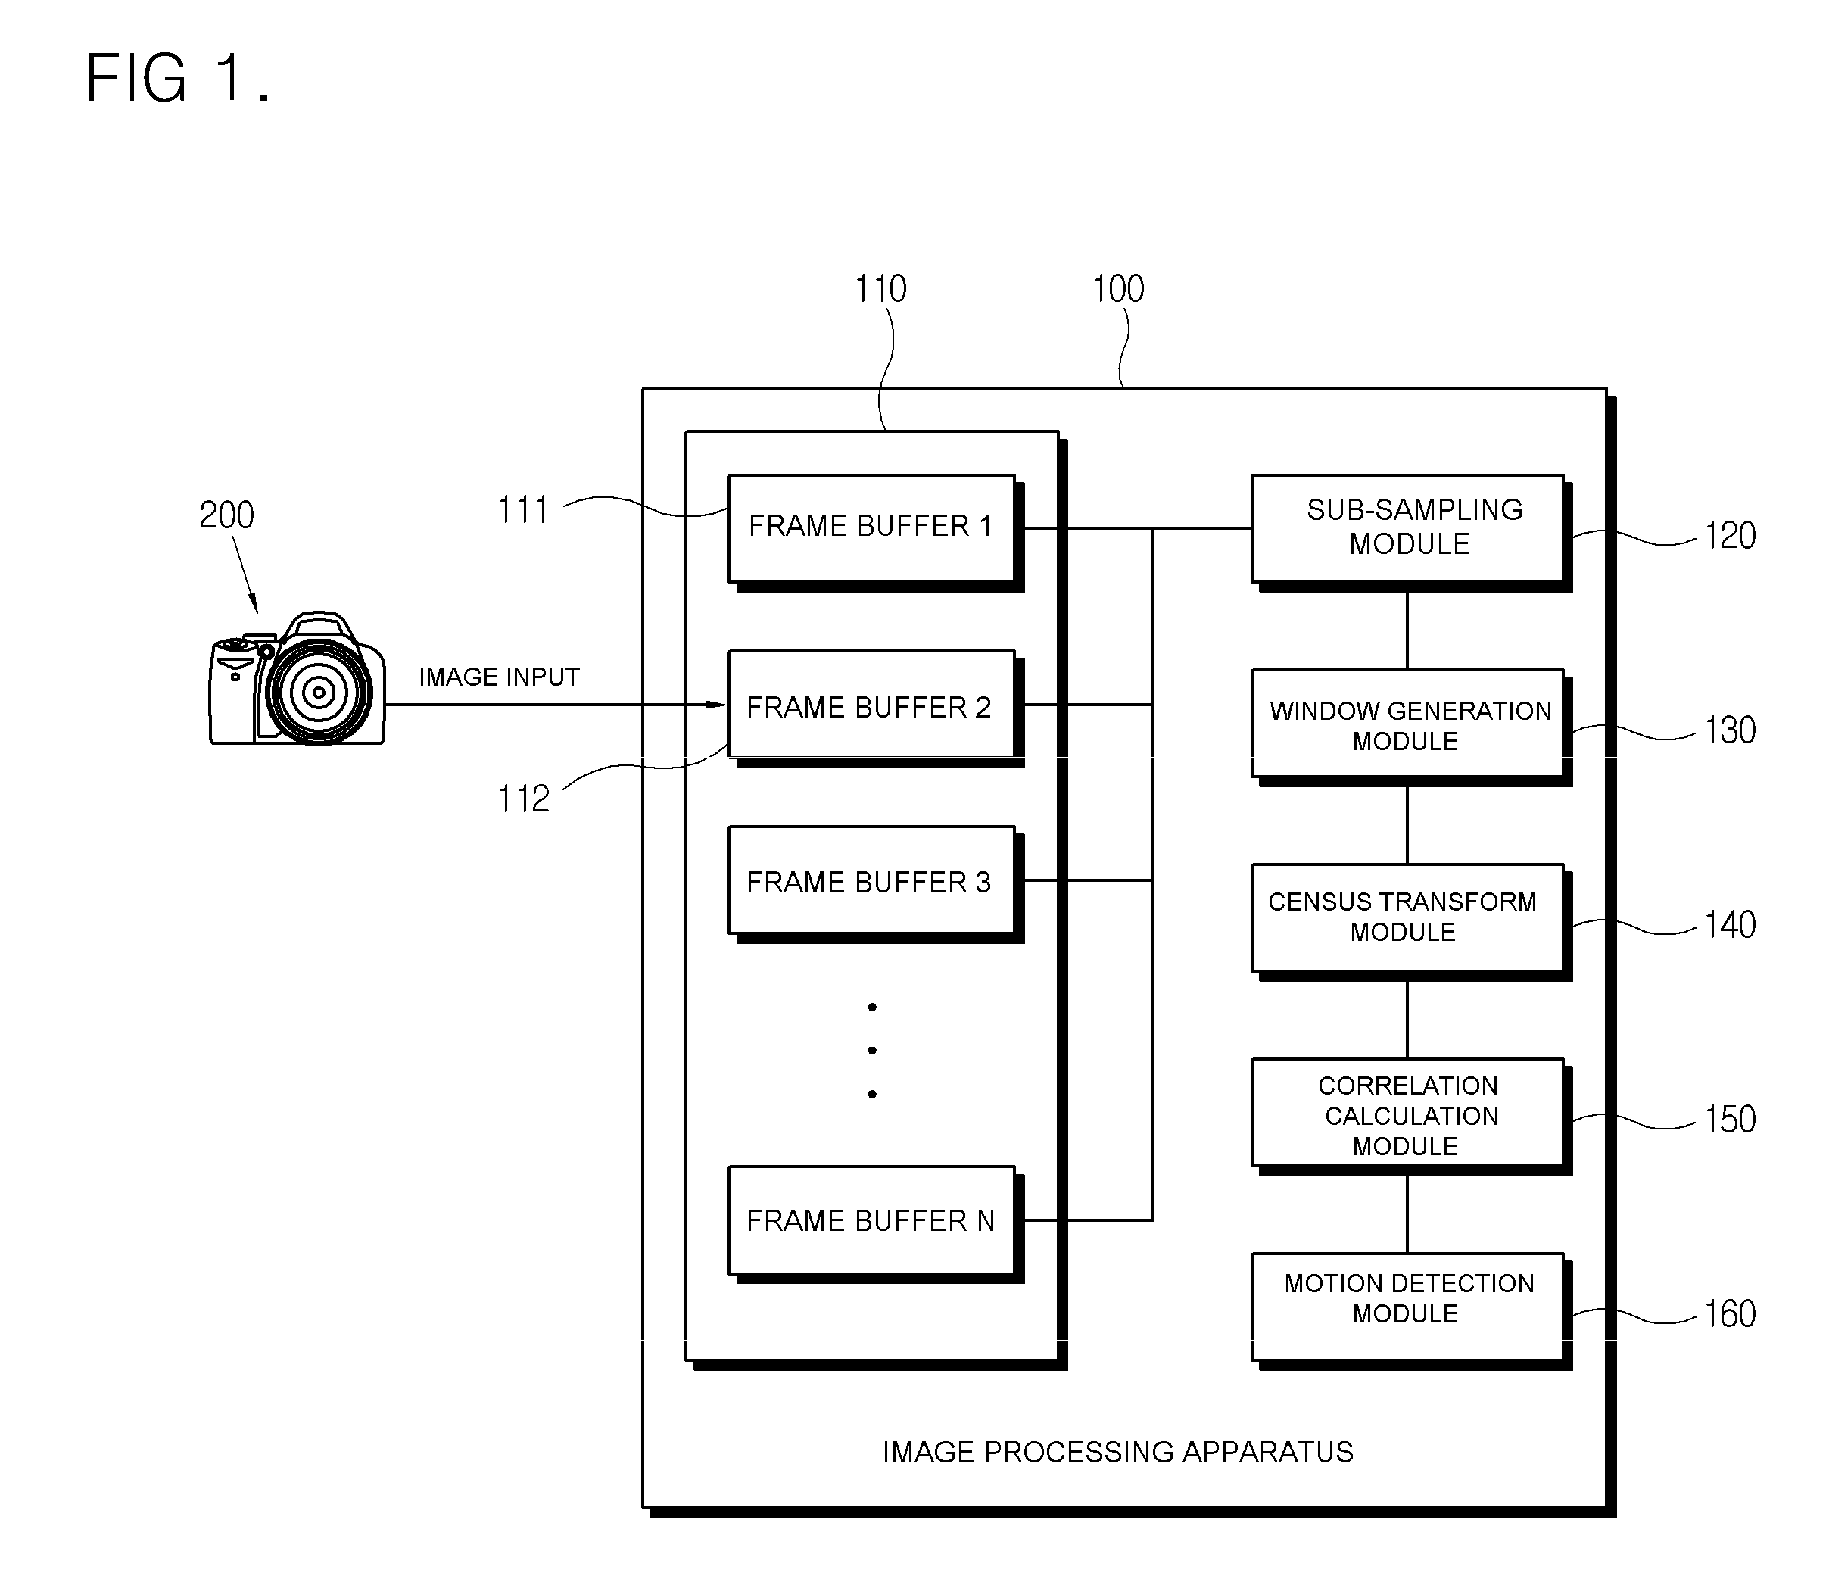 Image processing apparatus and method for real-time motion detection